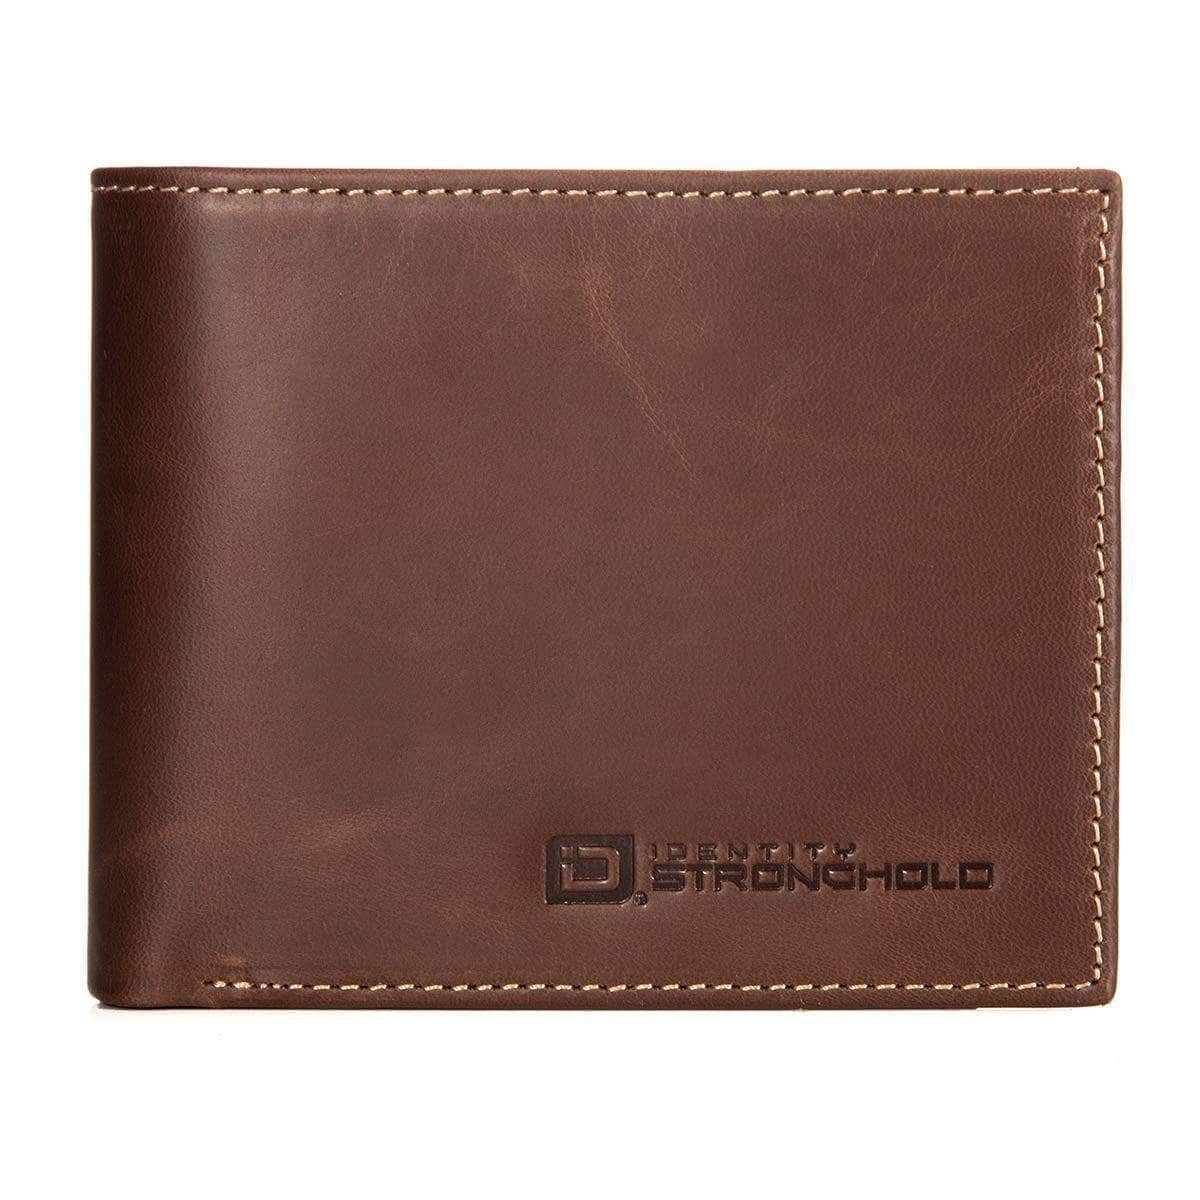 ID Stronghold Men's Wallet Brown Mens RFID Bifold Wallet 10 slot - Classic Leather